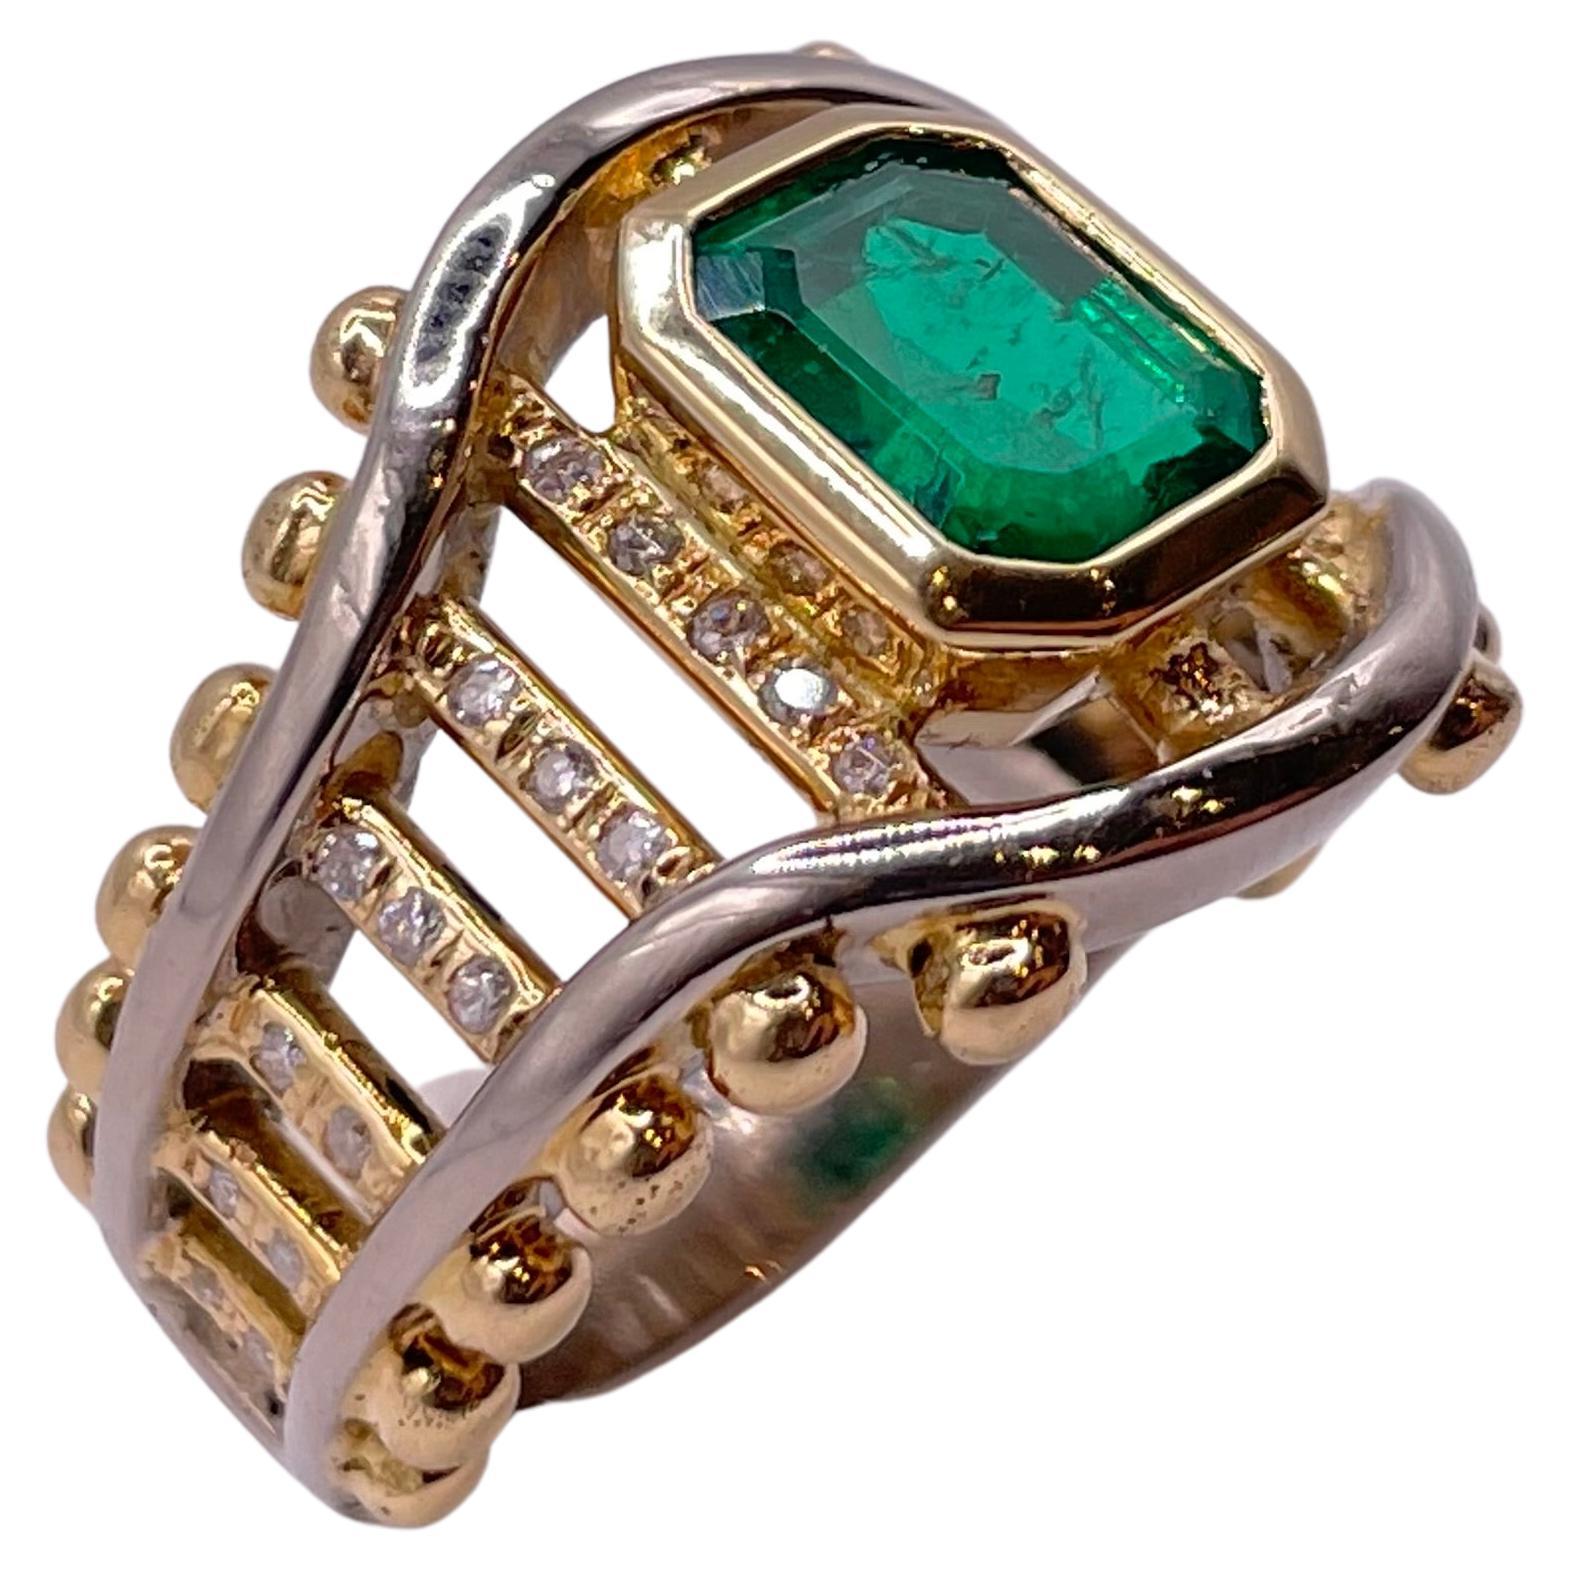 1.60 Carat Colombian Emerald and Diamond Ring 18K Gold and IGI Certificate